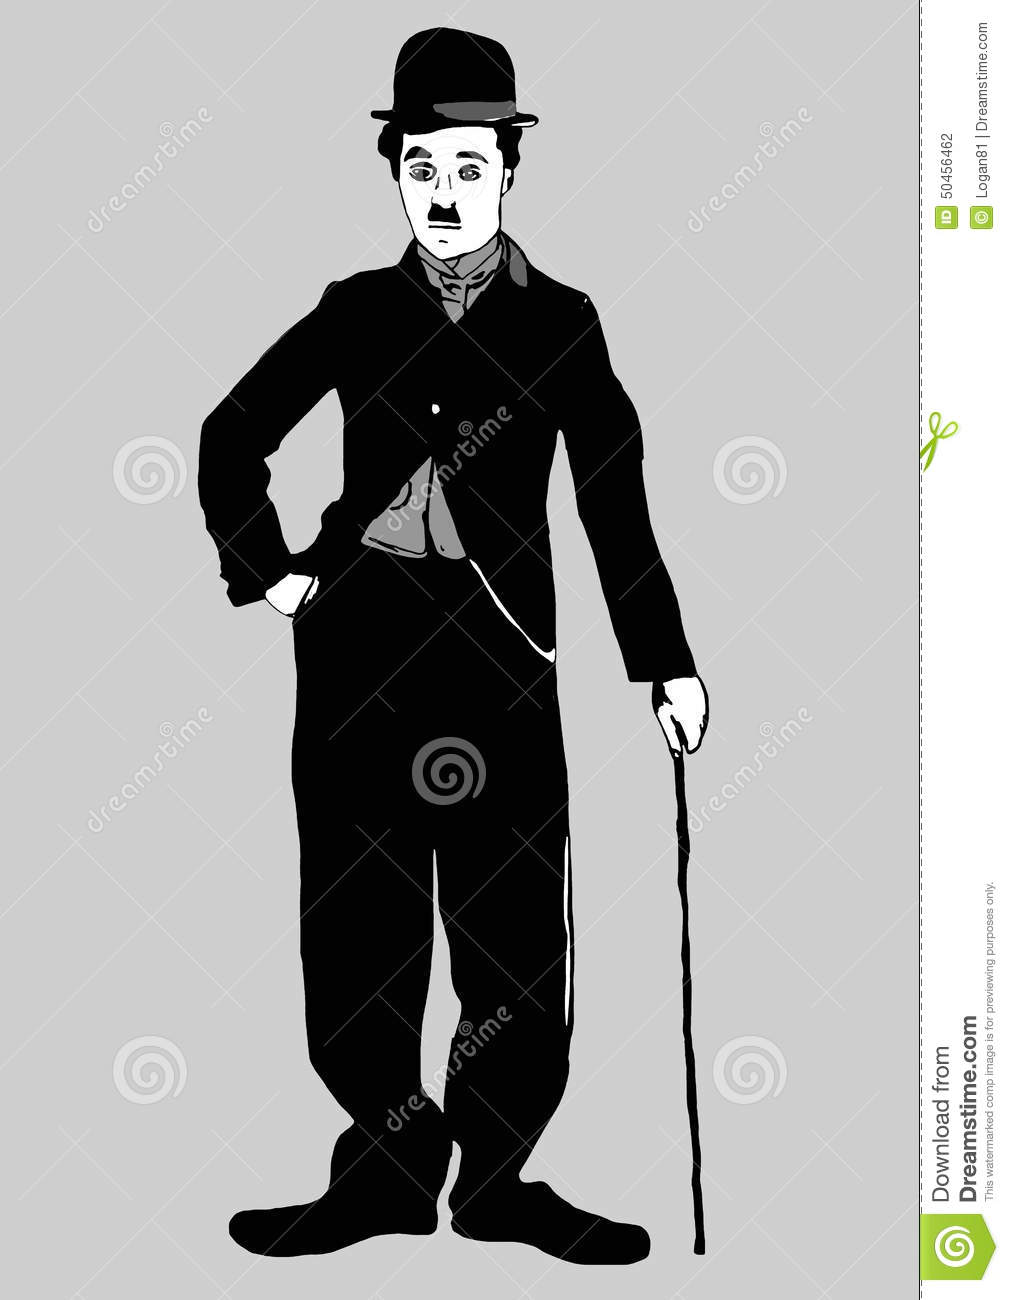 Charles chaplin clipart 20 free Cliparts | Download images on ...